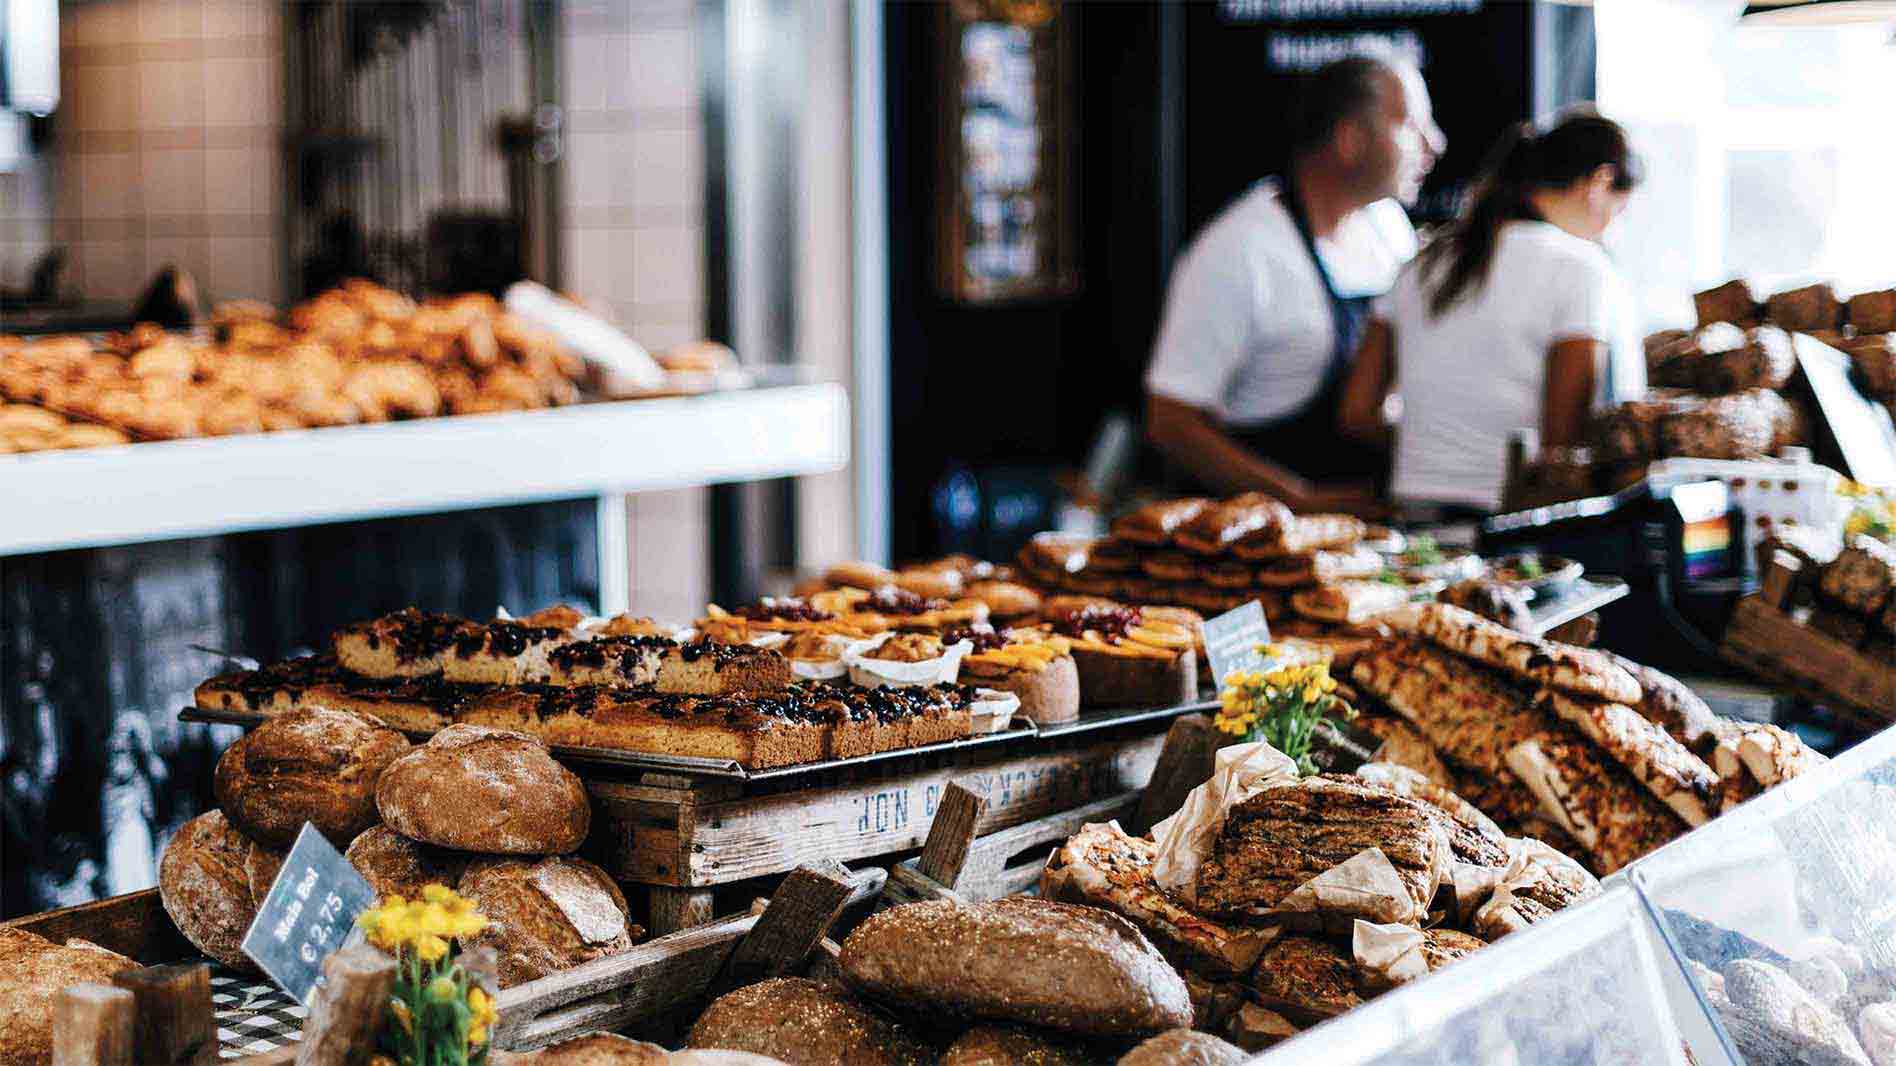 Bakers treat: the 5 items every bakery needs to save time and money